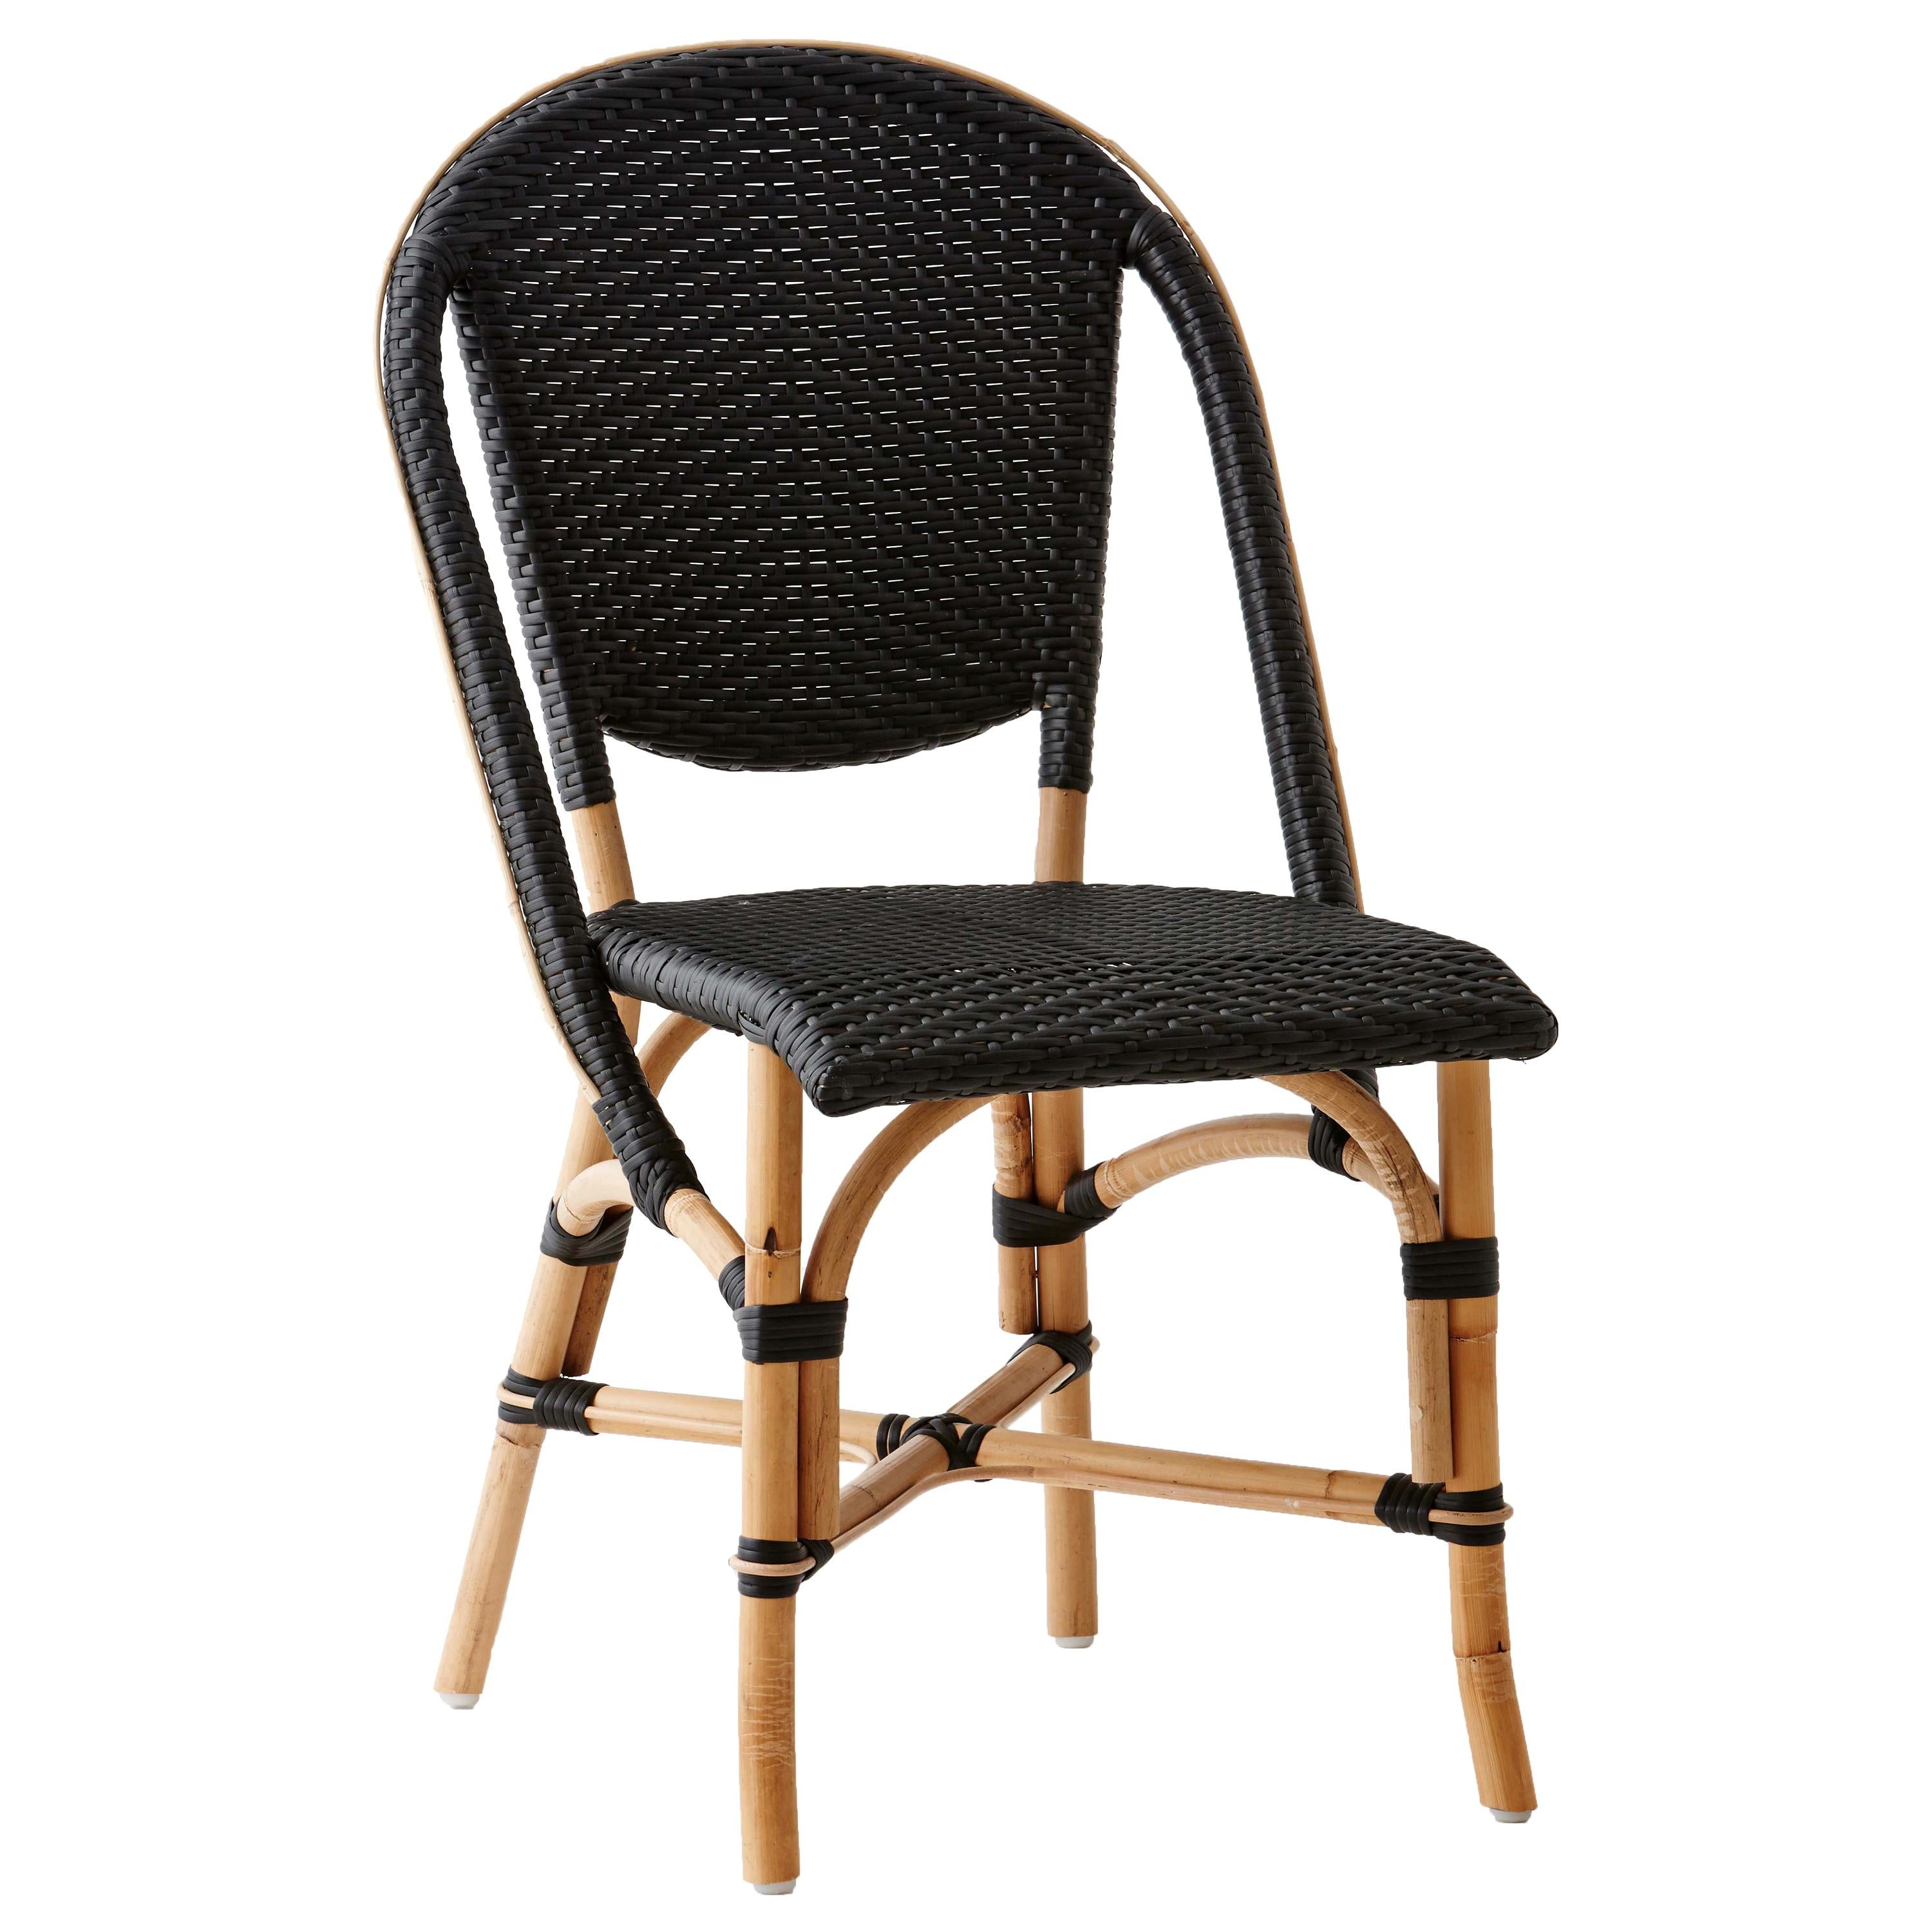 Sika Design Sofie Woven Rattan Bistro Side Chair in Black